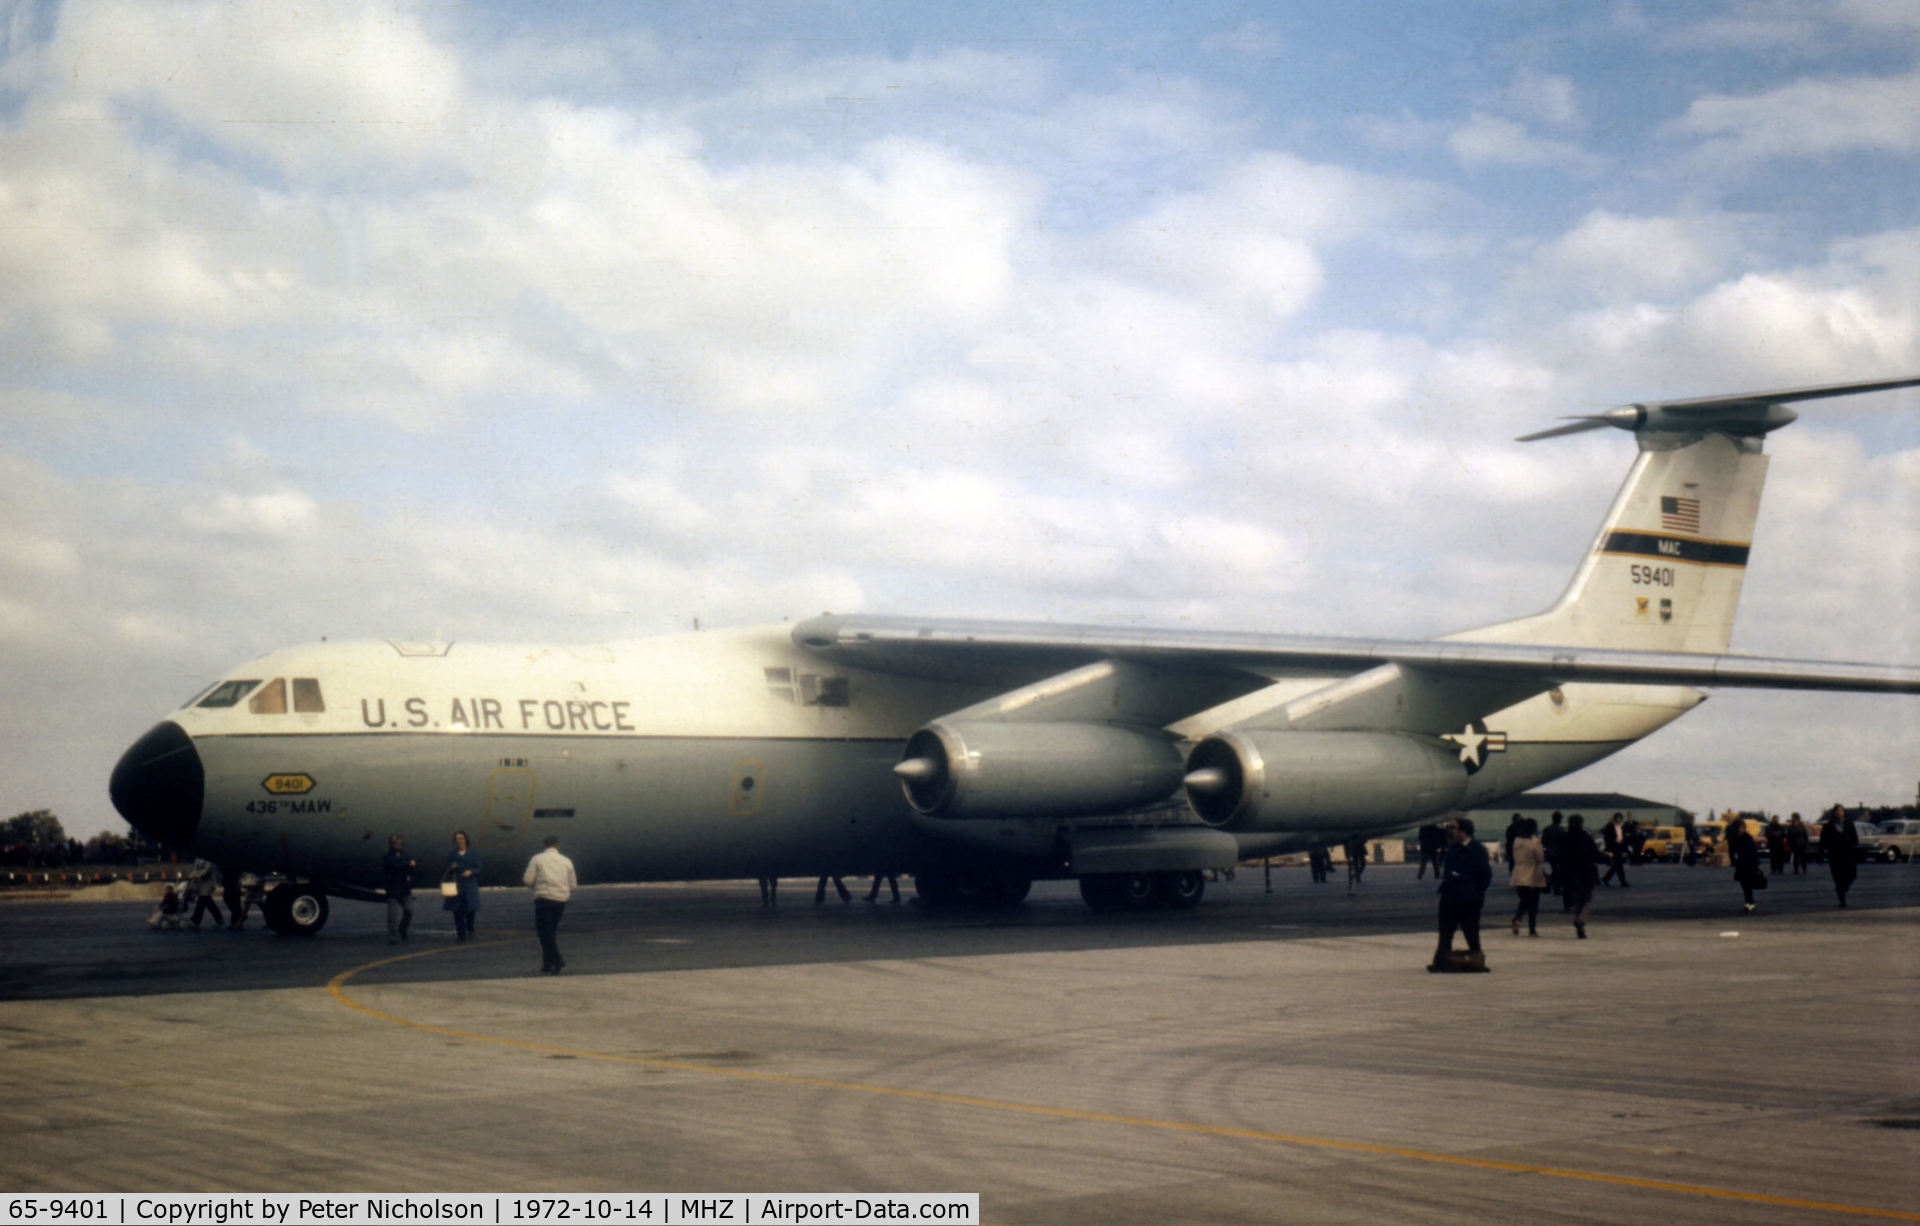 65-9401, 1965 Lockheed C-141A Starlifter C/N 300-6138, C-141A Starlifter of 436th Military Airlift Wing at Dover AFB on display at the 1972 RAF Mildenhall Air Fete.